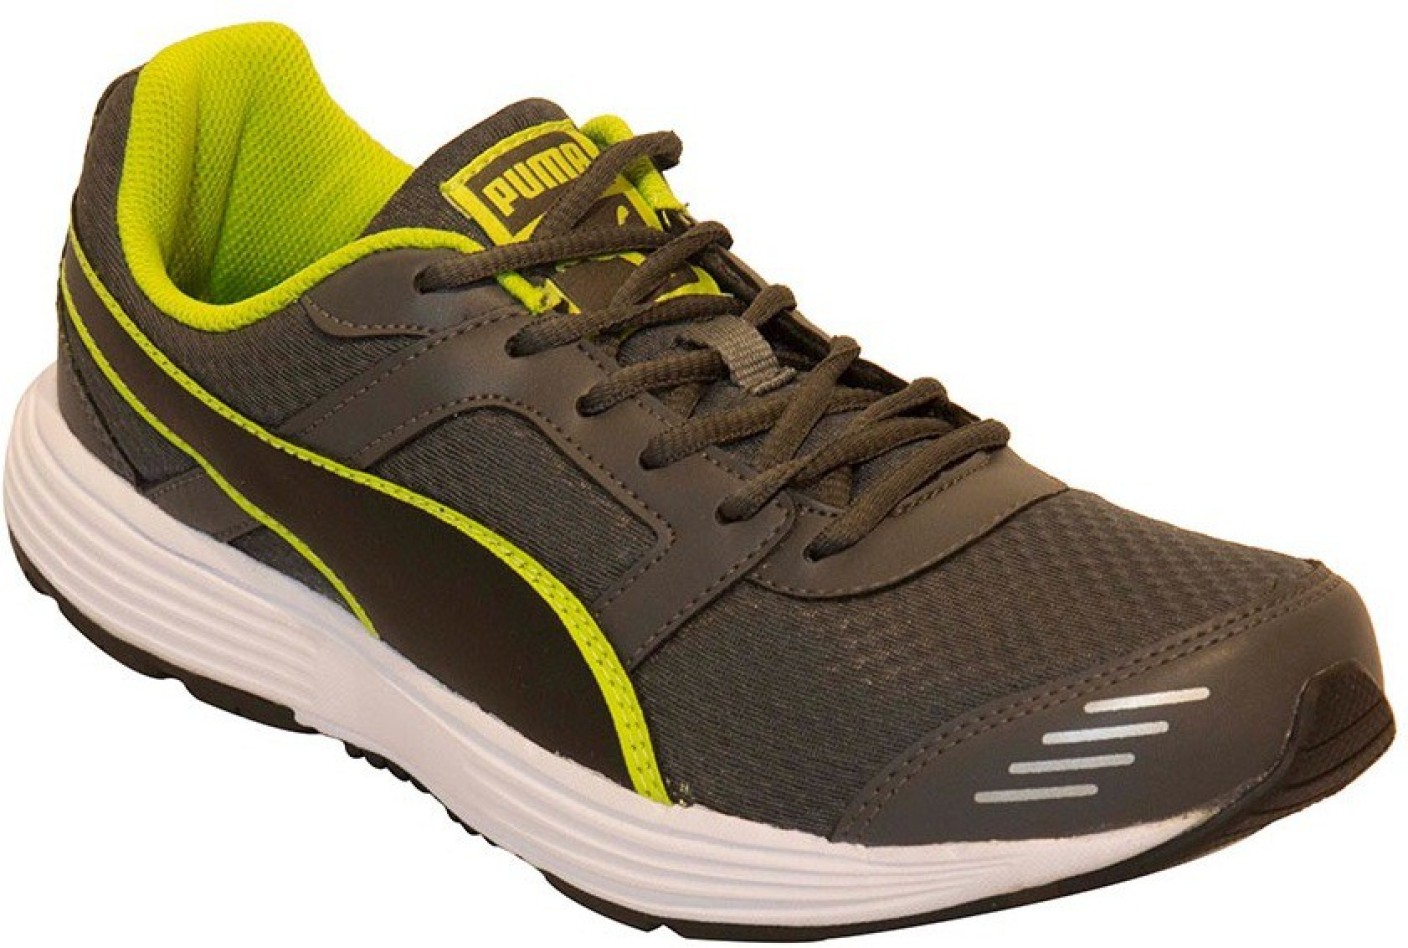 Puma Harbour DP Running Shoes For Men - Buy Grey-White-Green Color Puma ...